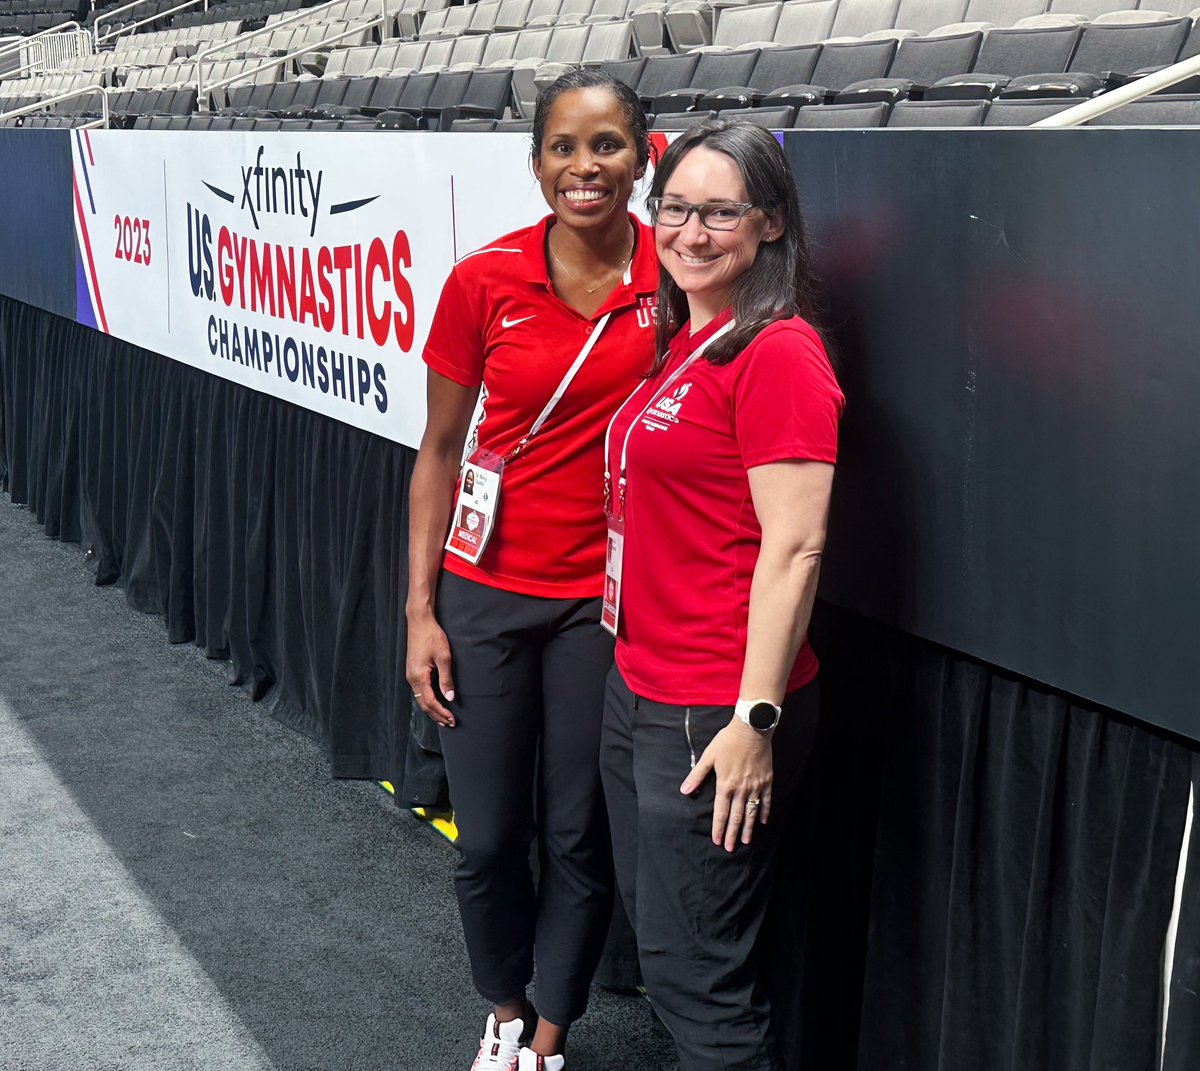 A fun weekend for @FaustinMarcia at the U.S. Gymnastics Championships! @Chancellor_May and department chair Dr. Craig McDonald also came out to watch some outstanding athletes!